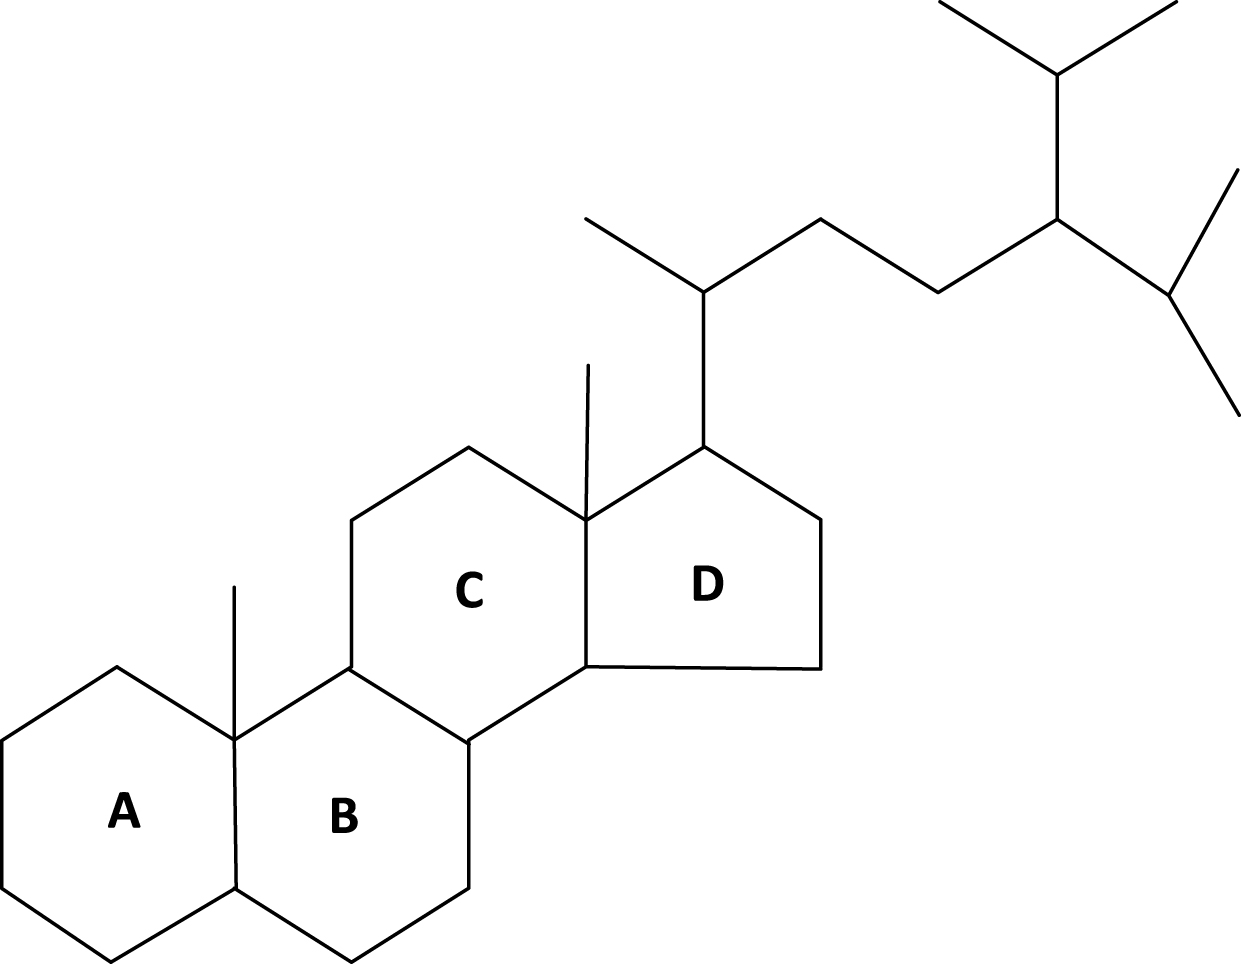 C30-desmethylsteranes. Note: C-24 isopropyl side chain, no double bonds and loss of 3ß-hydroxyl moiety. Adapted from Love et al. [1]. Molecule derived from demosponges over 635 million years ago (MYA).